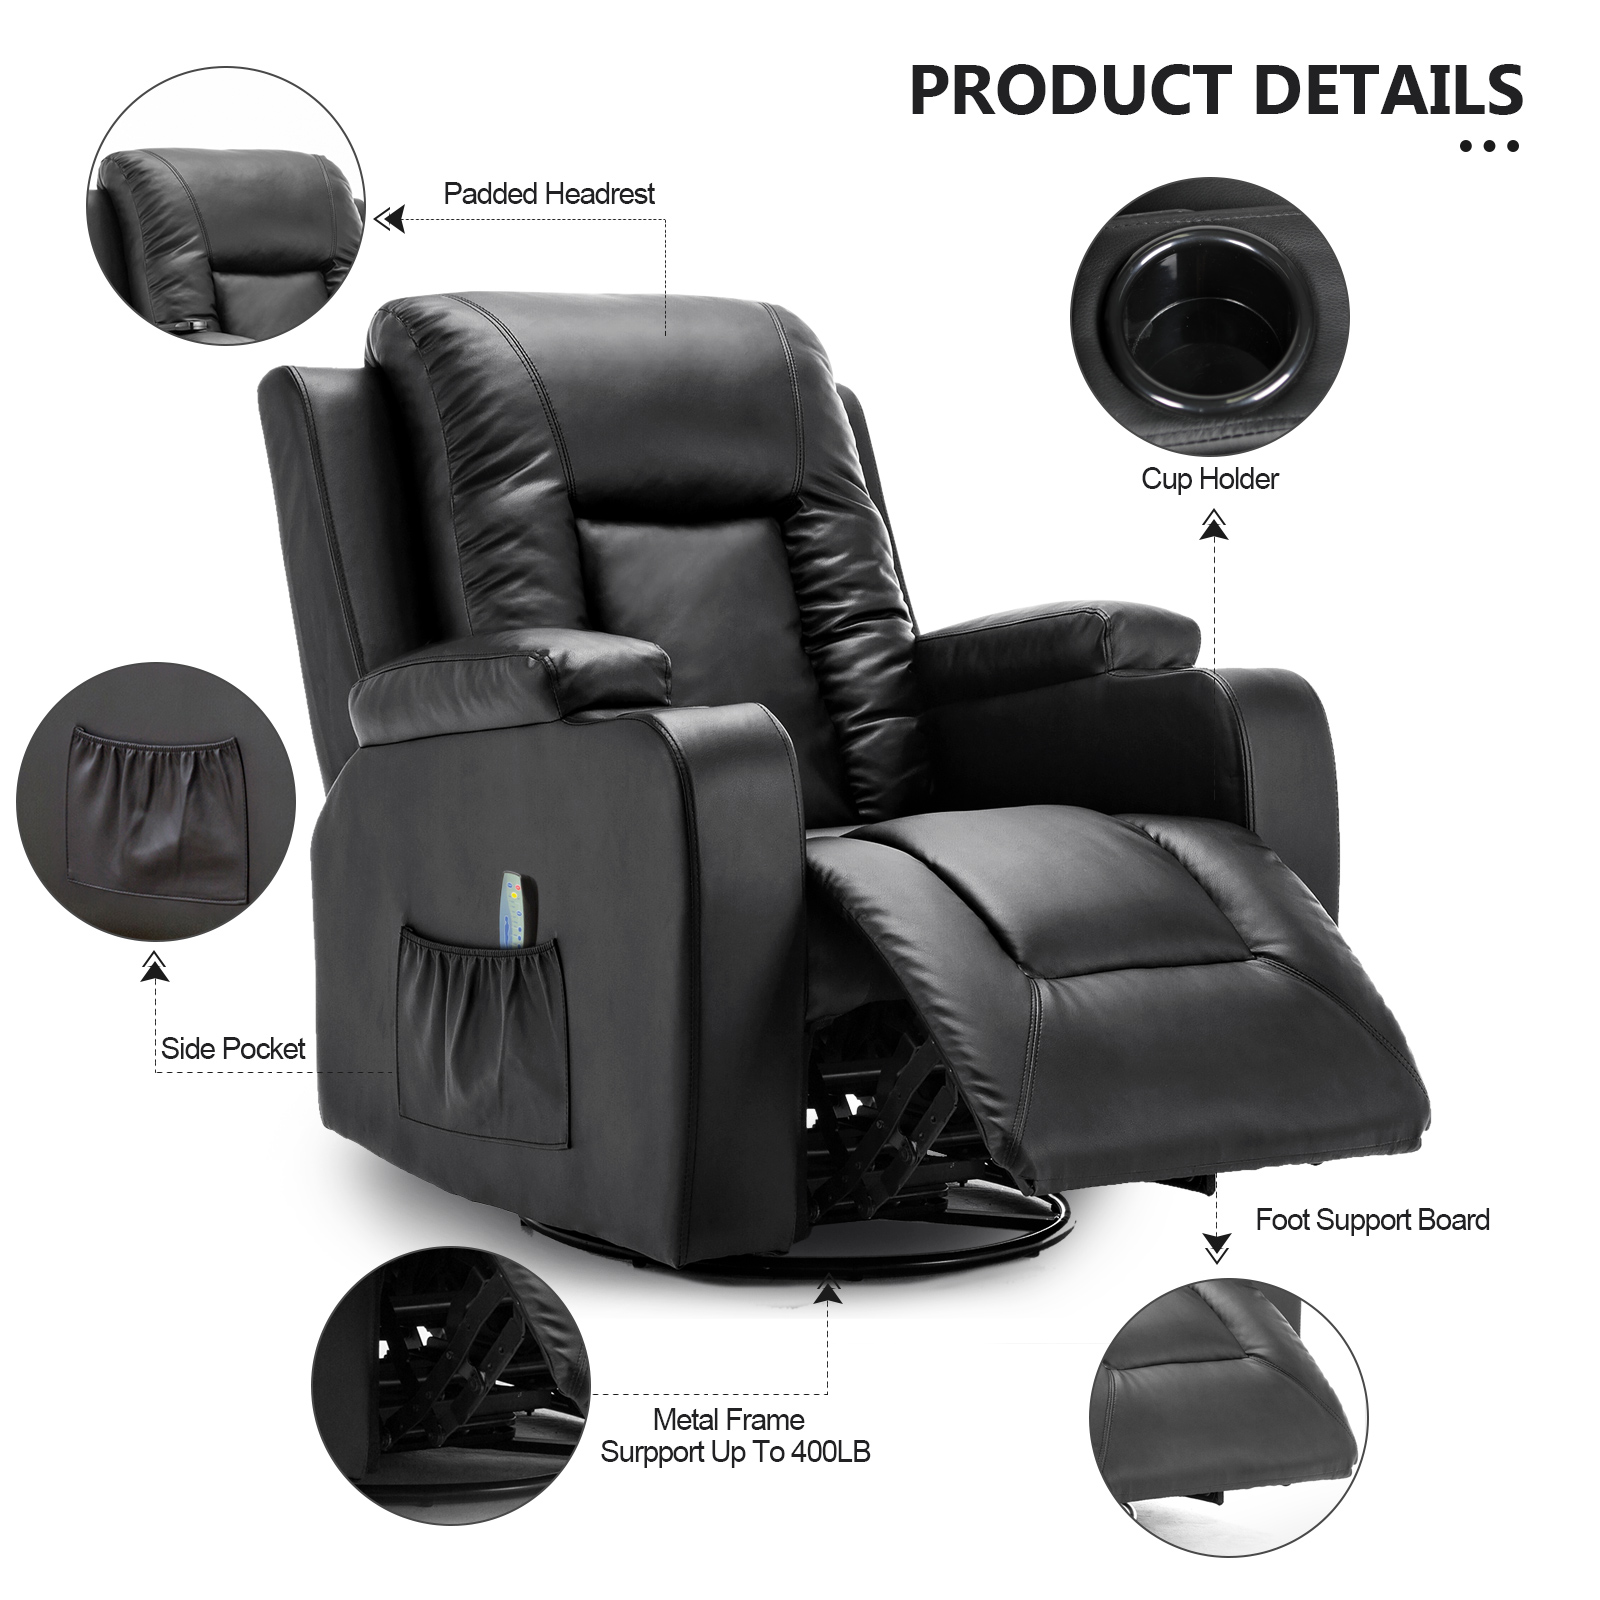 COMHOMA Swivel Rocker Recliner Chair PU Leather Rocking Sofa with Heated Massage, Black - image 5 of 8